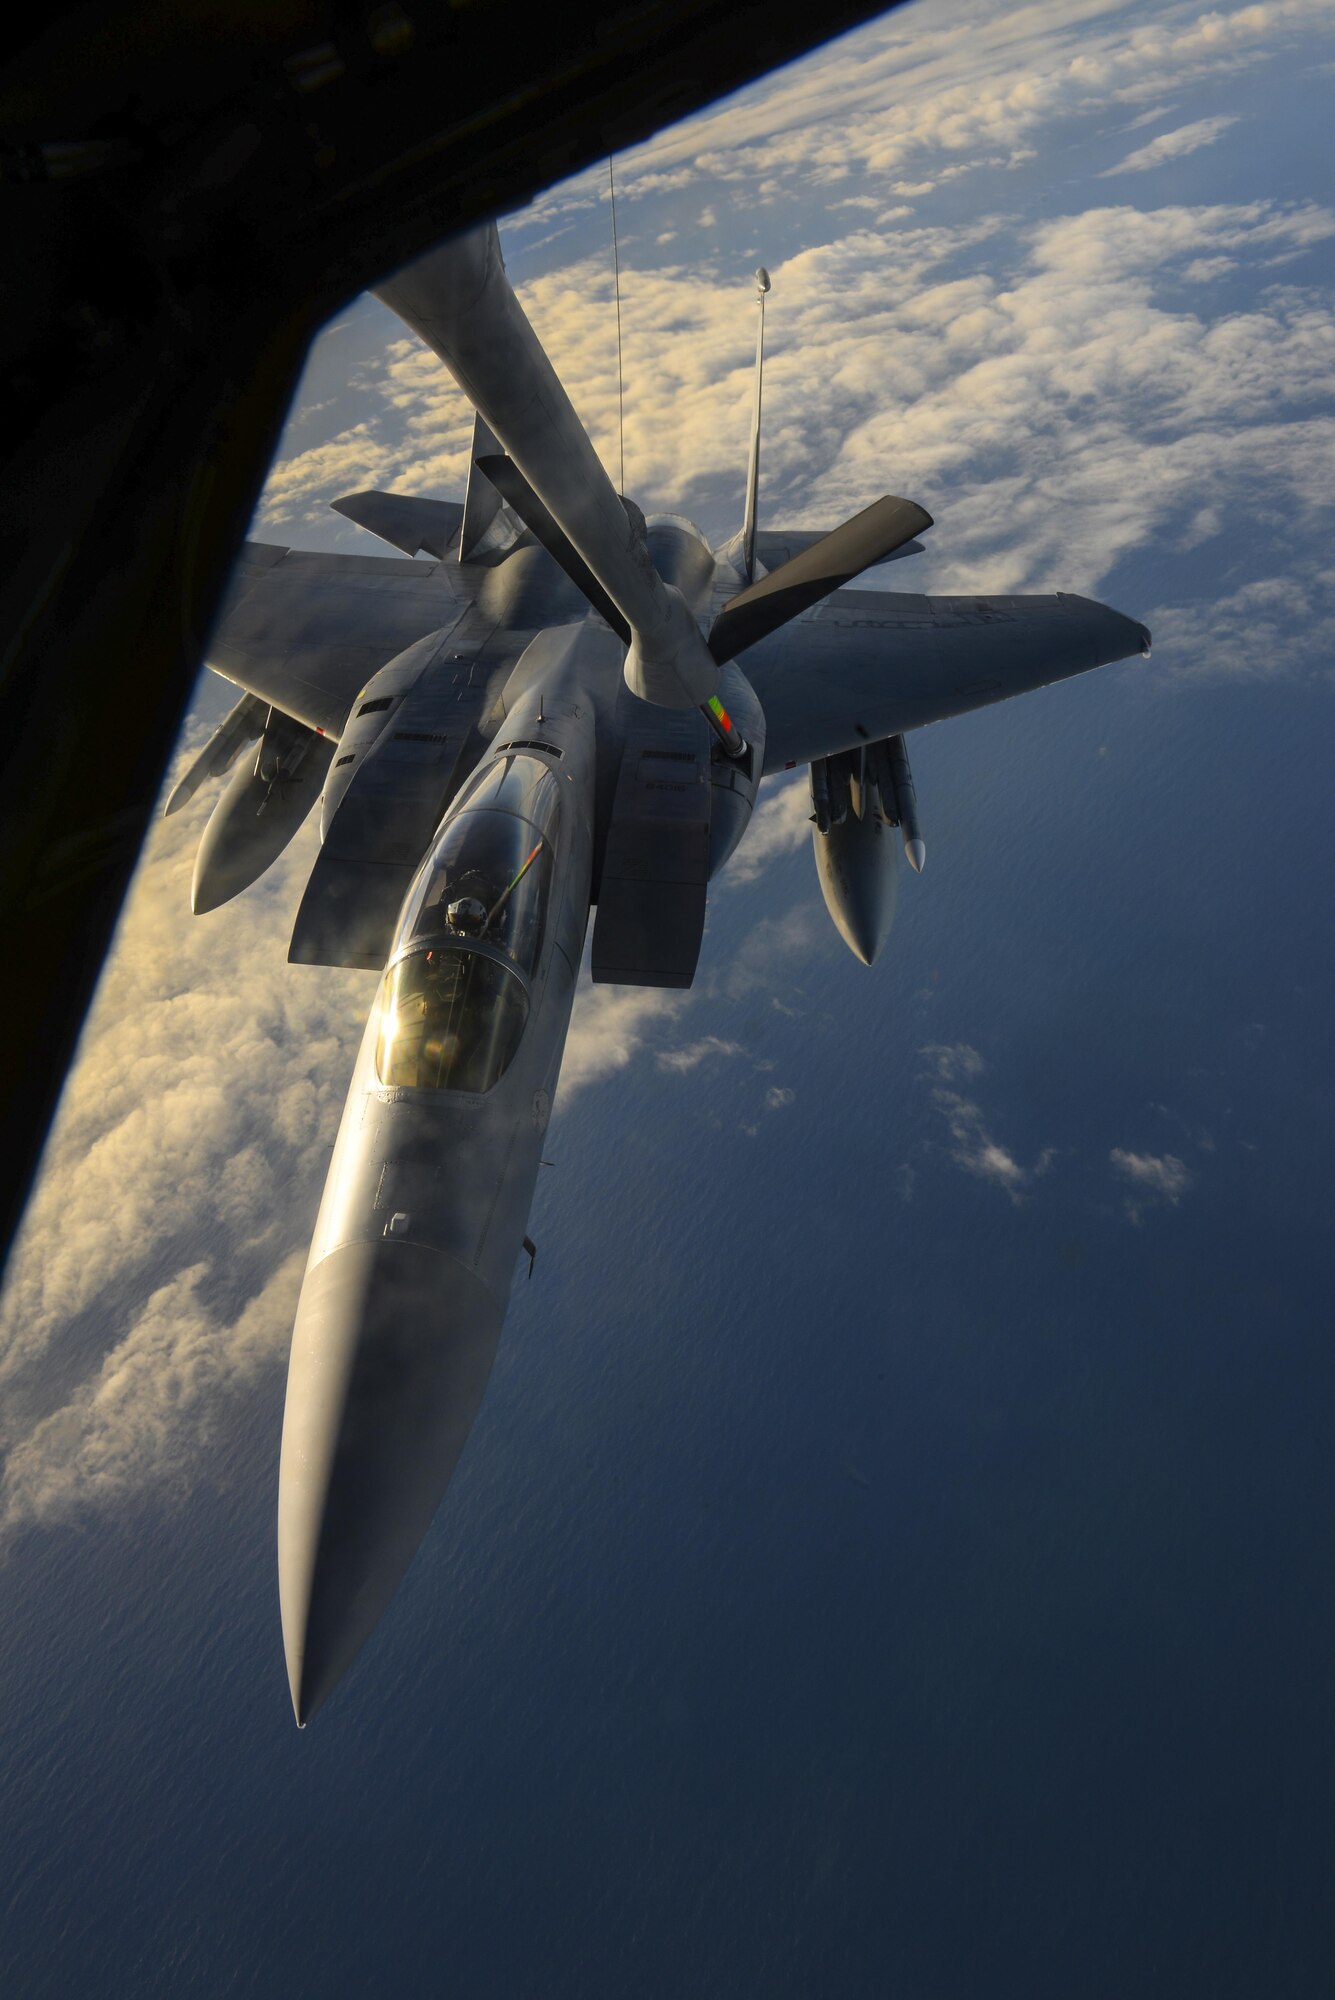 A U.S. Air Force F-15D Eagle, assigned to the 48th Fighter Wing from RAF Lakenheath, England, receives fuel from a KC-135 Stratotanker assigned to the 349th Air Mobility Wing from Beale Air Force Base, Calif., Dec. 2, 2016, over the Atlantic Ocean. U.S. Air Force Col. Thomas Torkelson, 100th Air Refueling Wing commander at RAF Mildenhall, England, flew in an F-15 as a part of a familiarization flight to enable him to experience what it’s like to receive fuel from a KC-135. (U.S. Air Force photo by Staff Sgt. Micaiah Anthony)